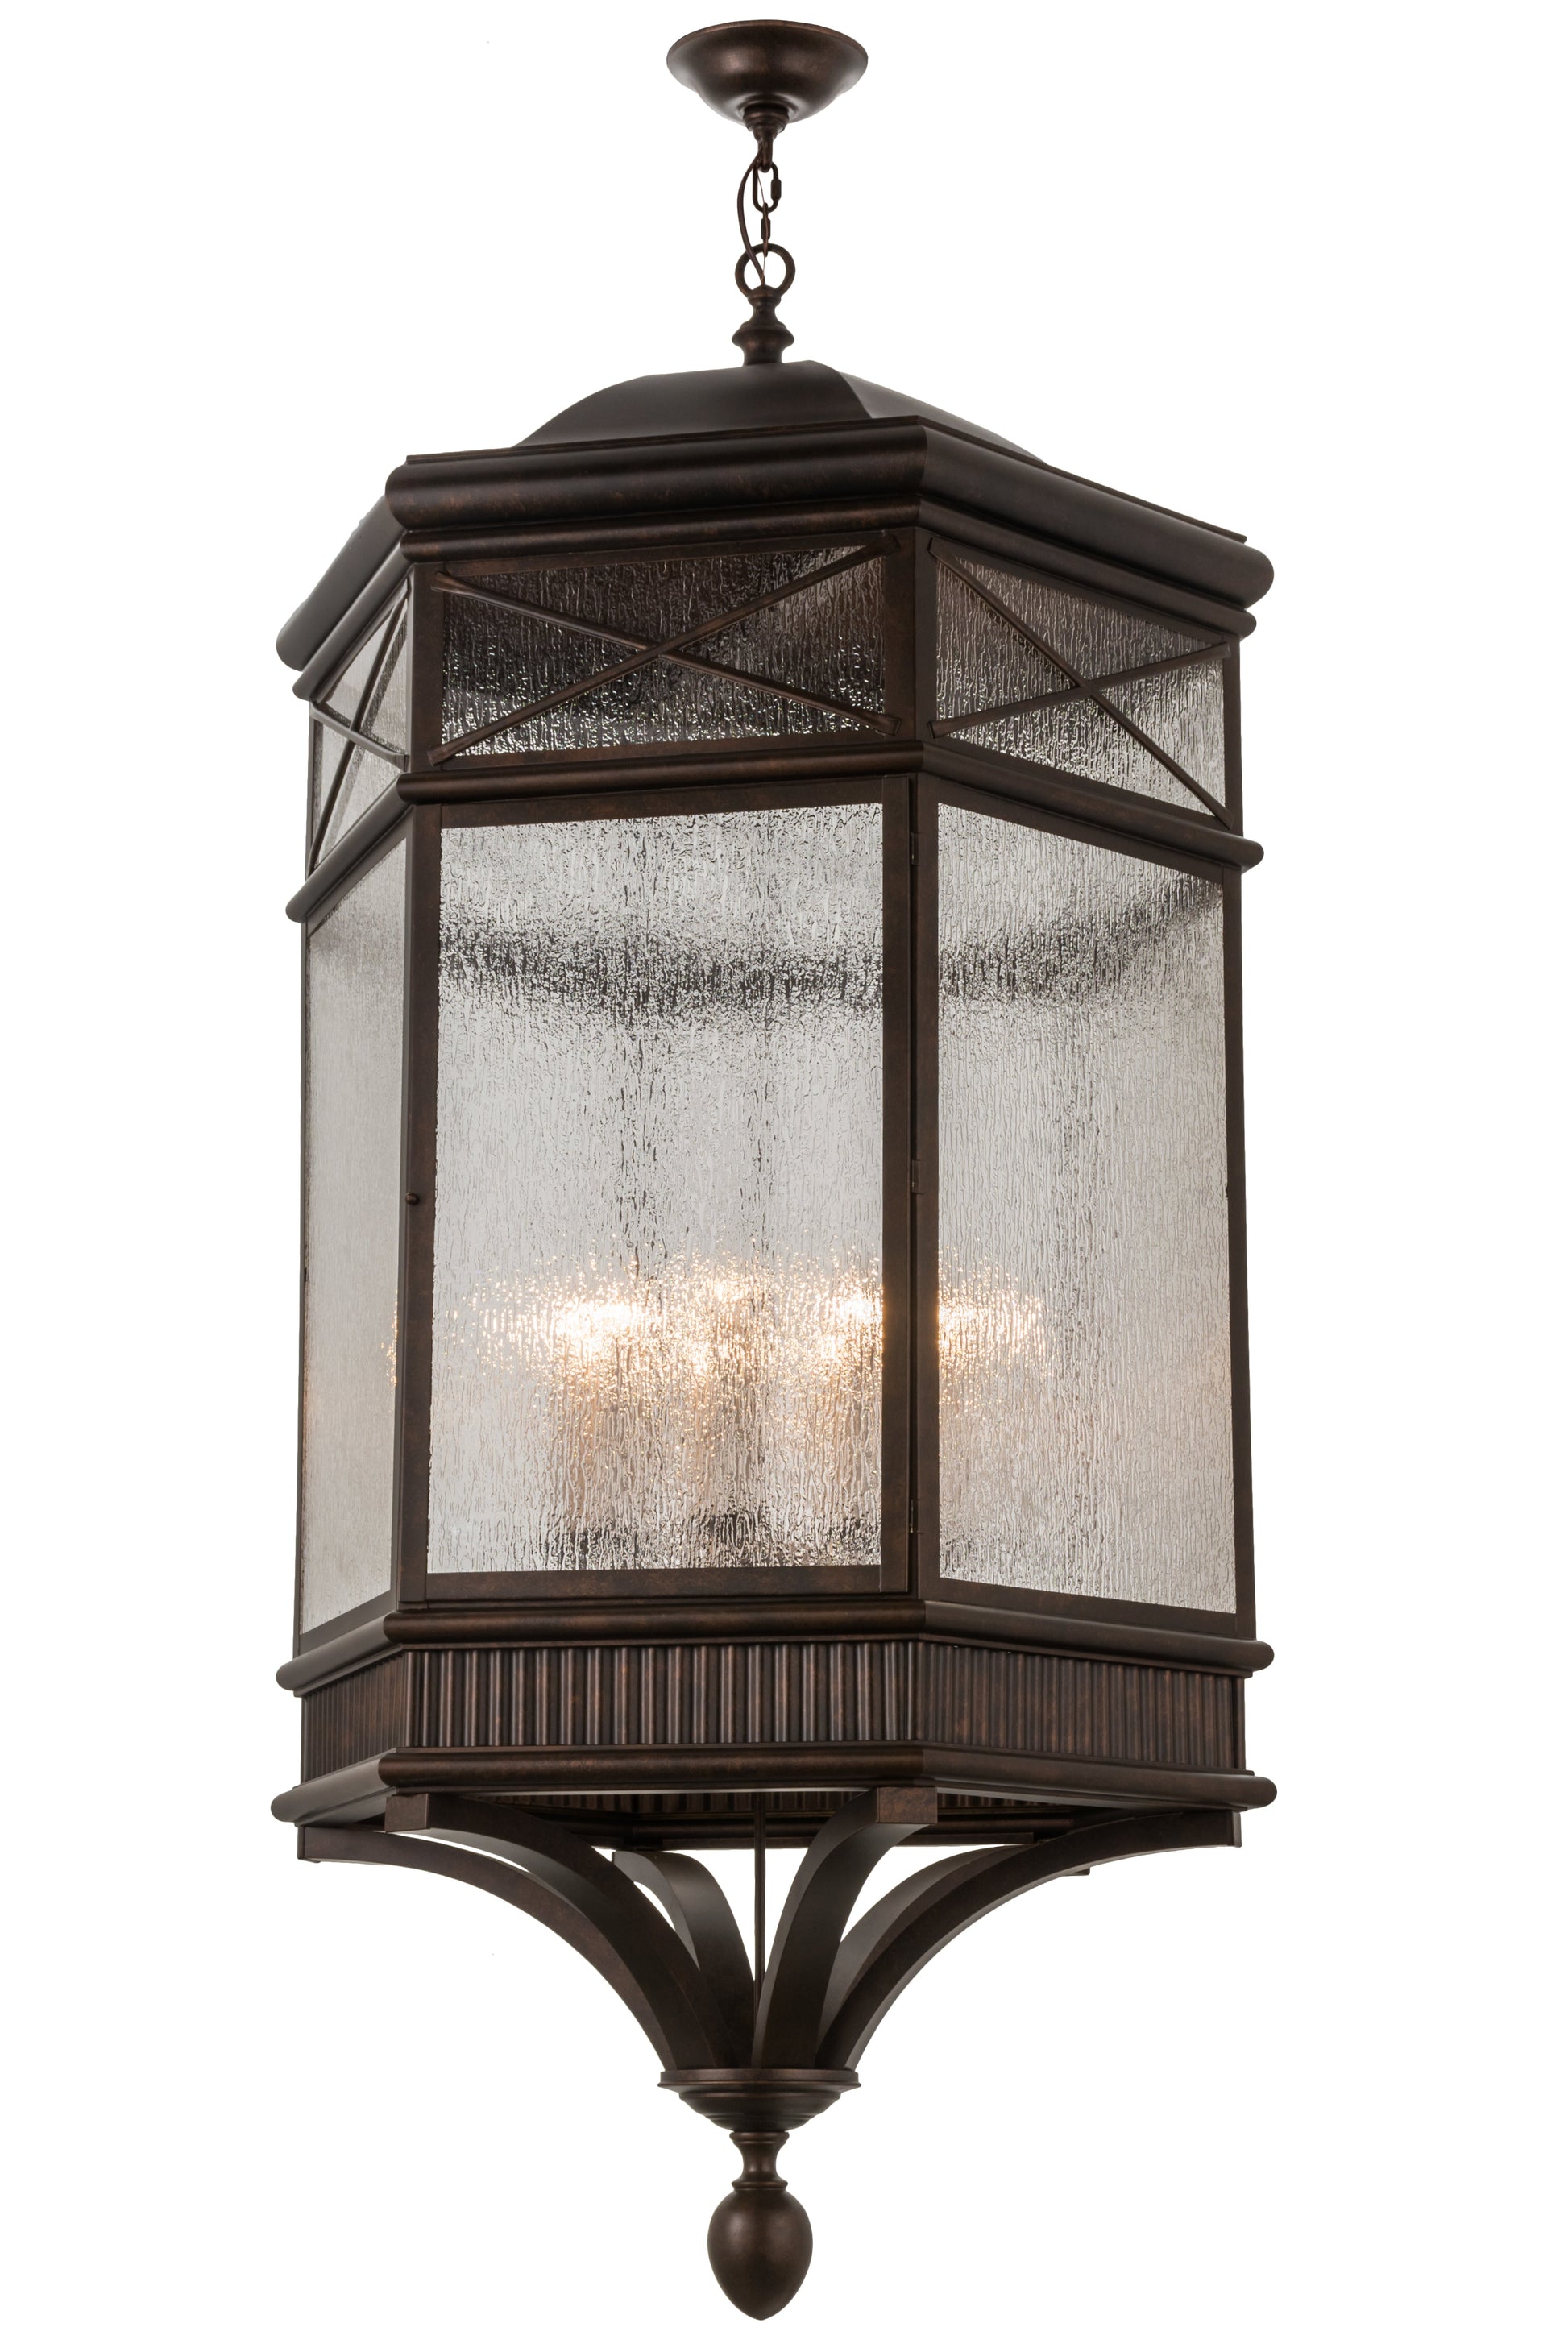 36" Newquay Hanging Lantern Pendant by 2nd Ave Lighting